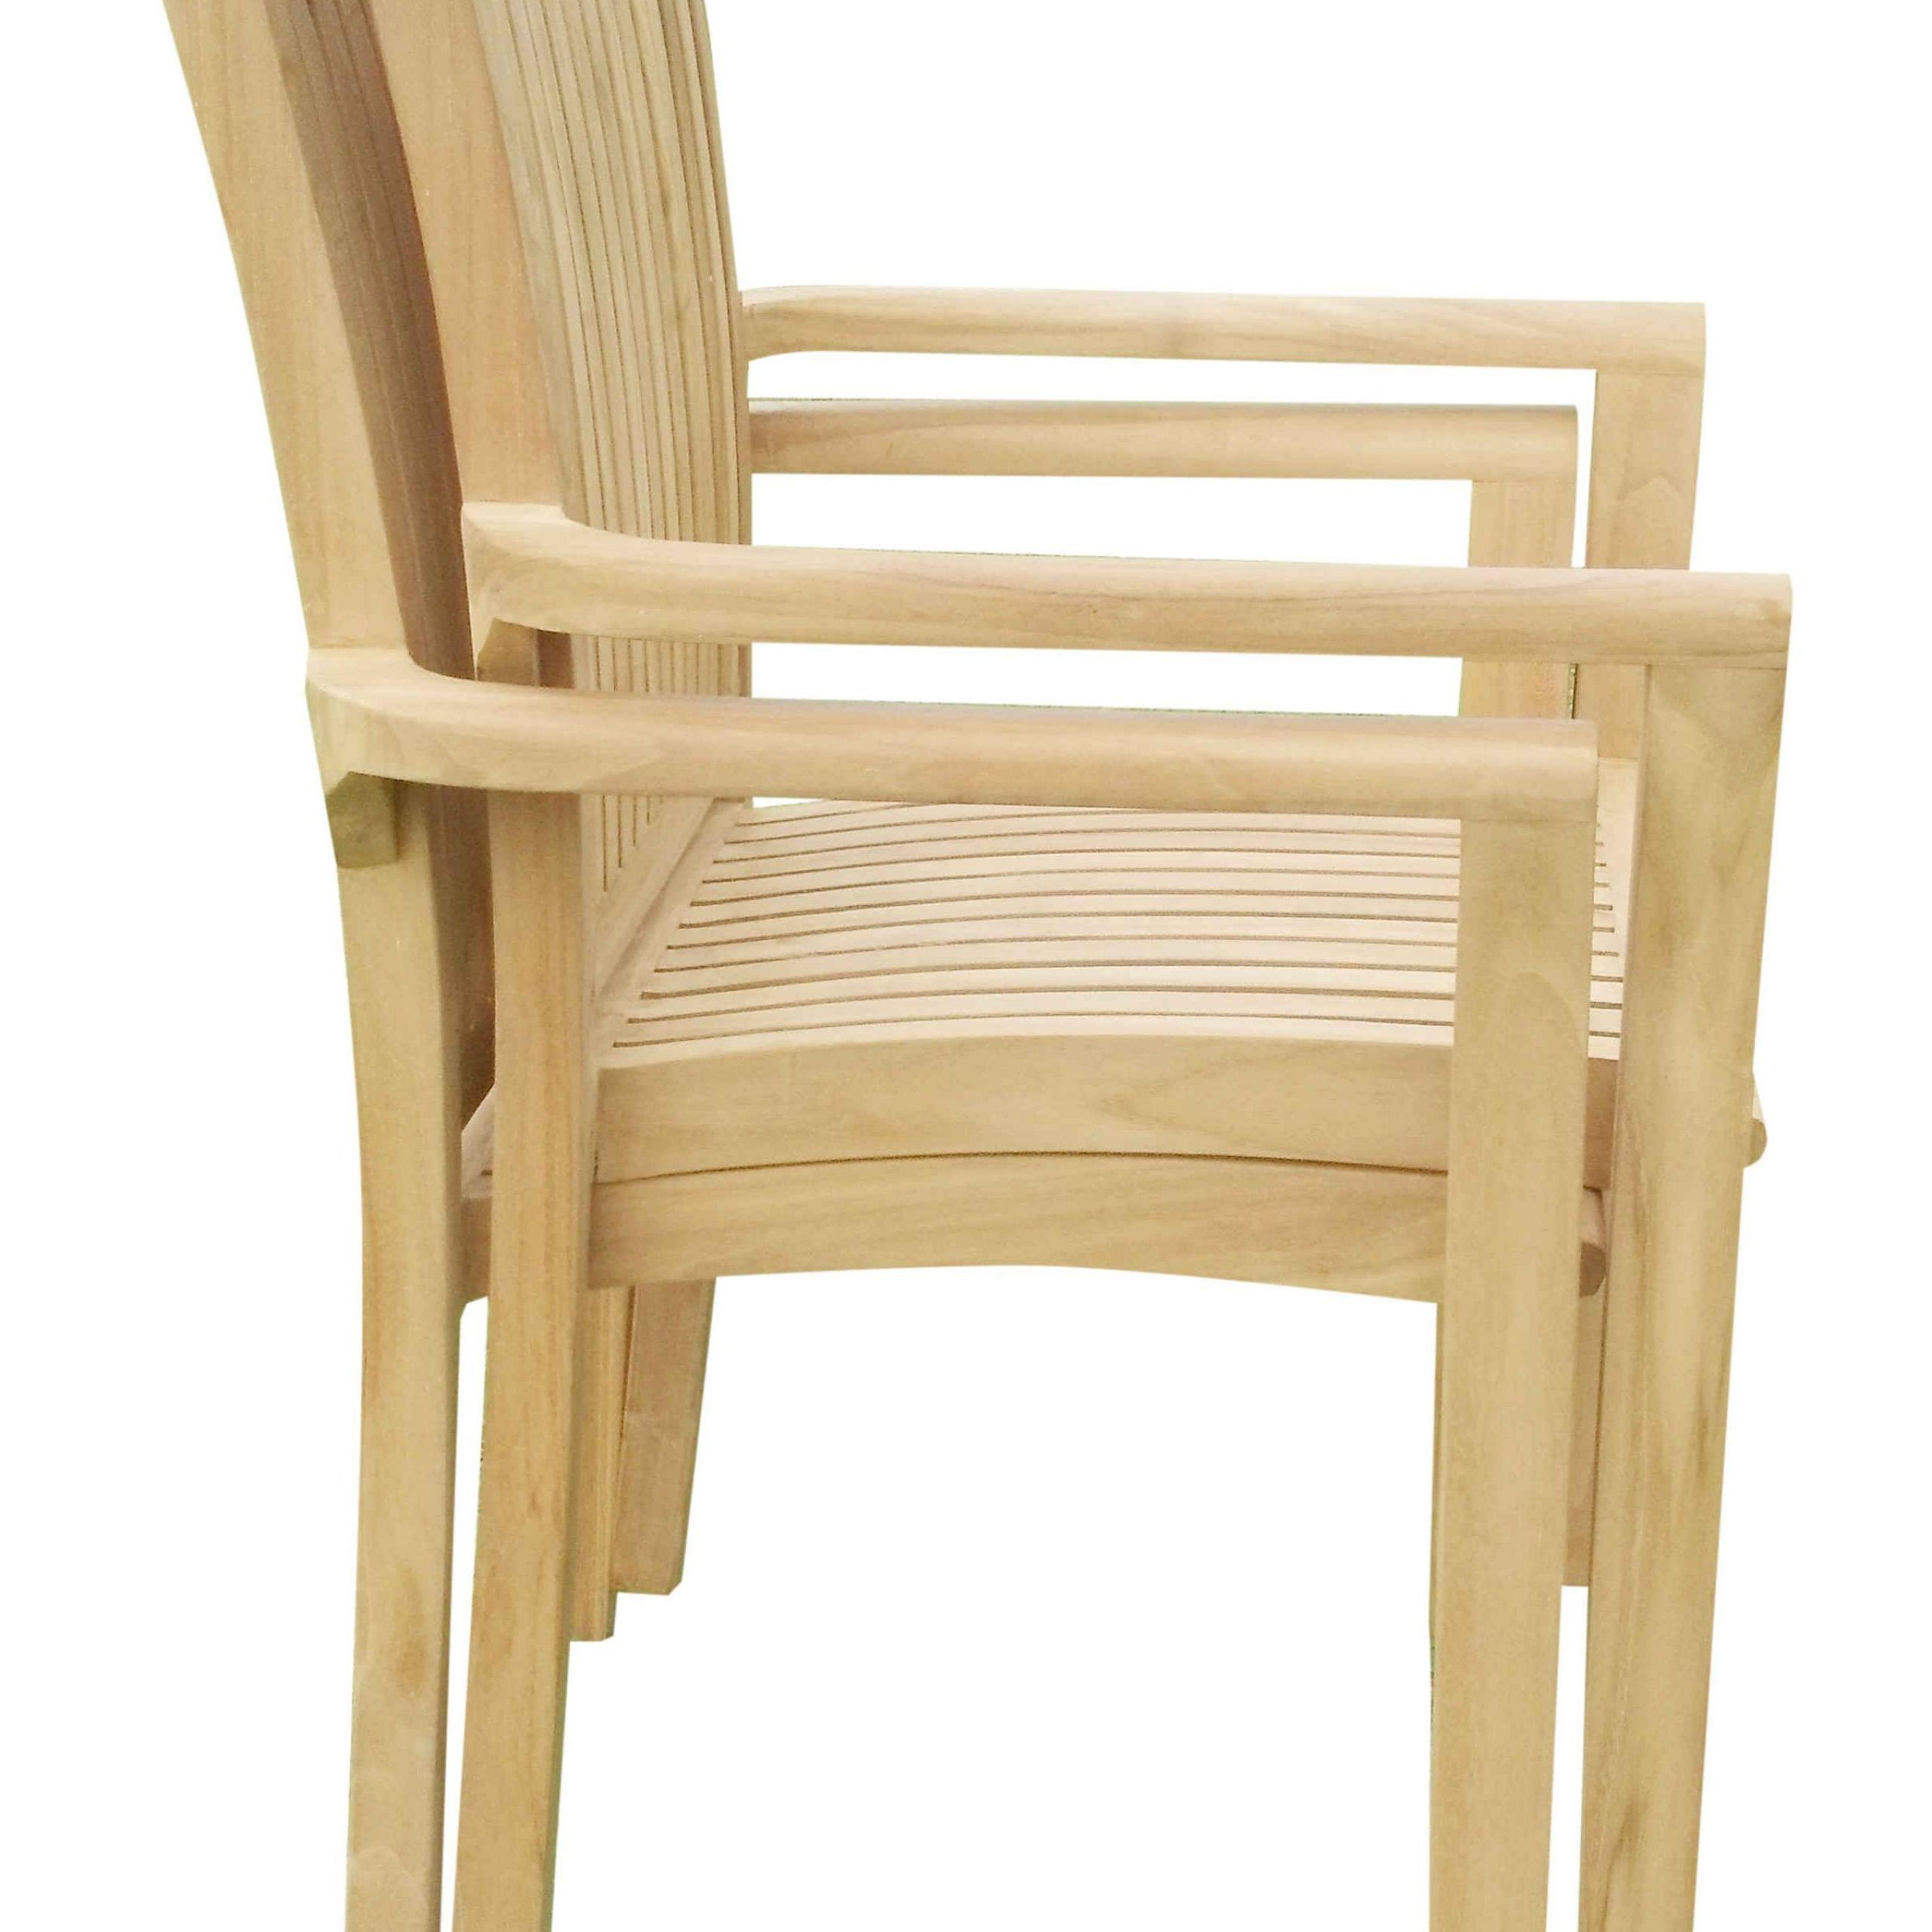 Lua Stacking Arm Chair | Teak Chairs, Chair, Teak Chair Regarding Stacking Outdoor Armchairs Sets (View 9 of 15)